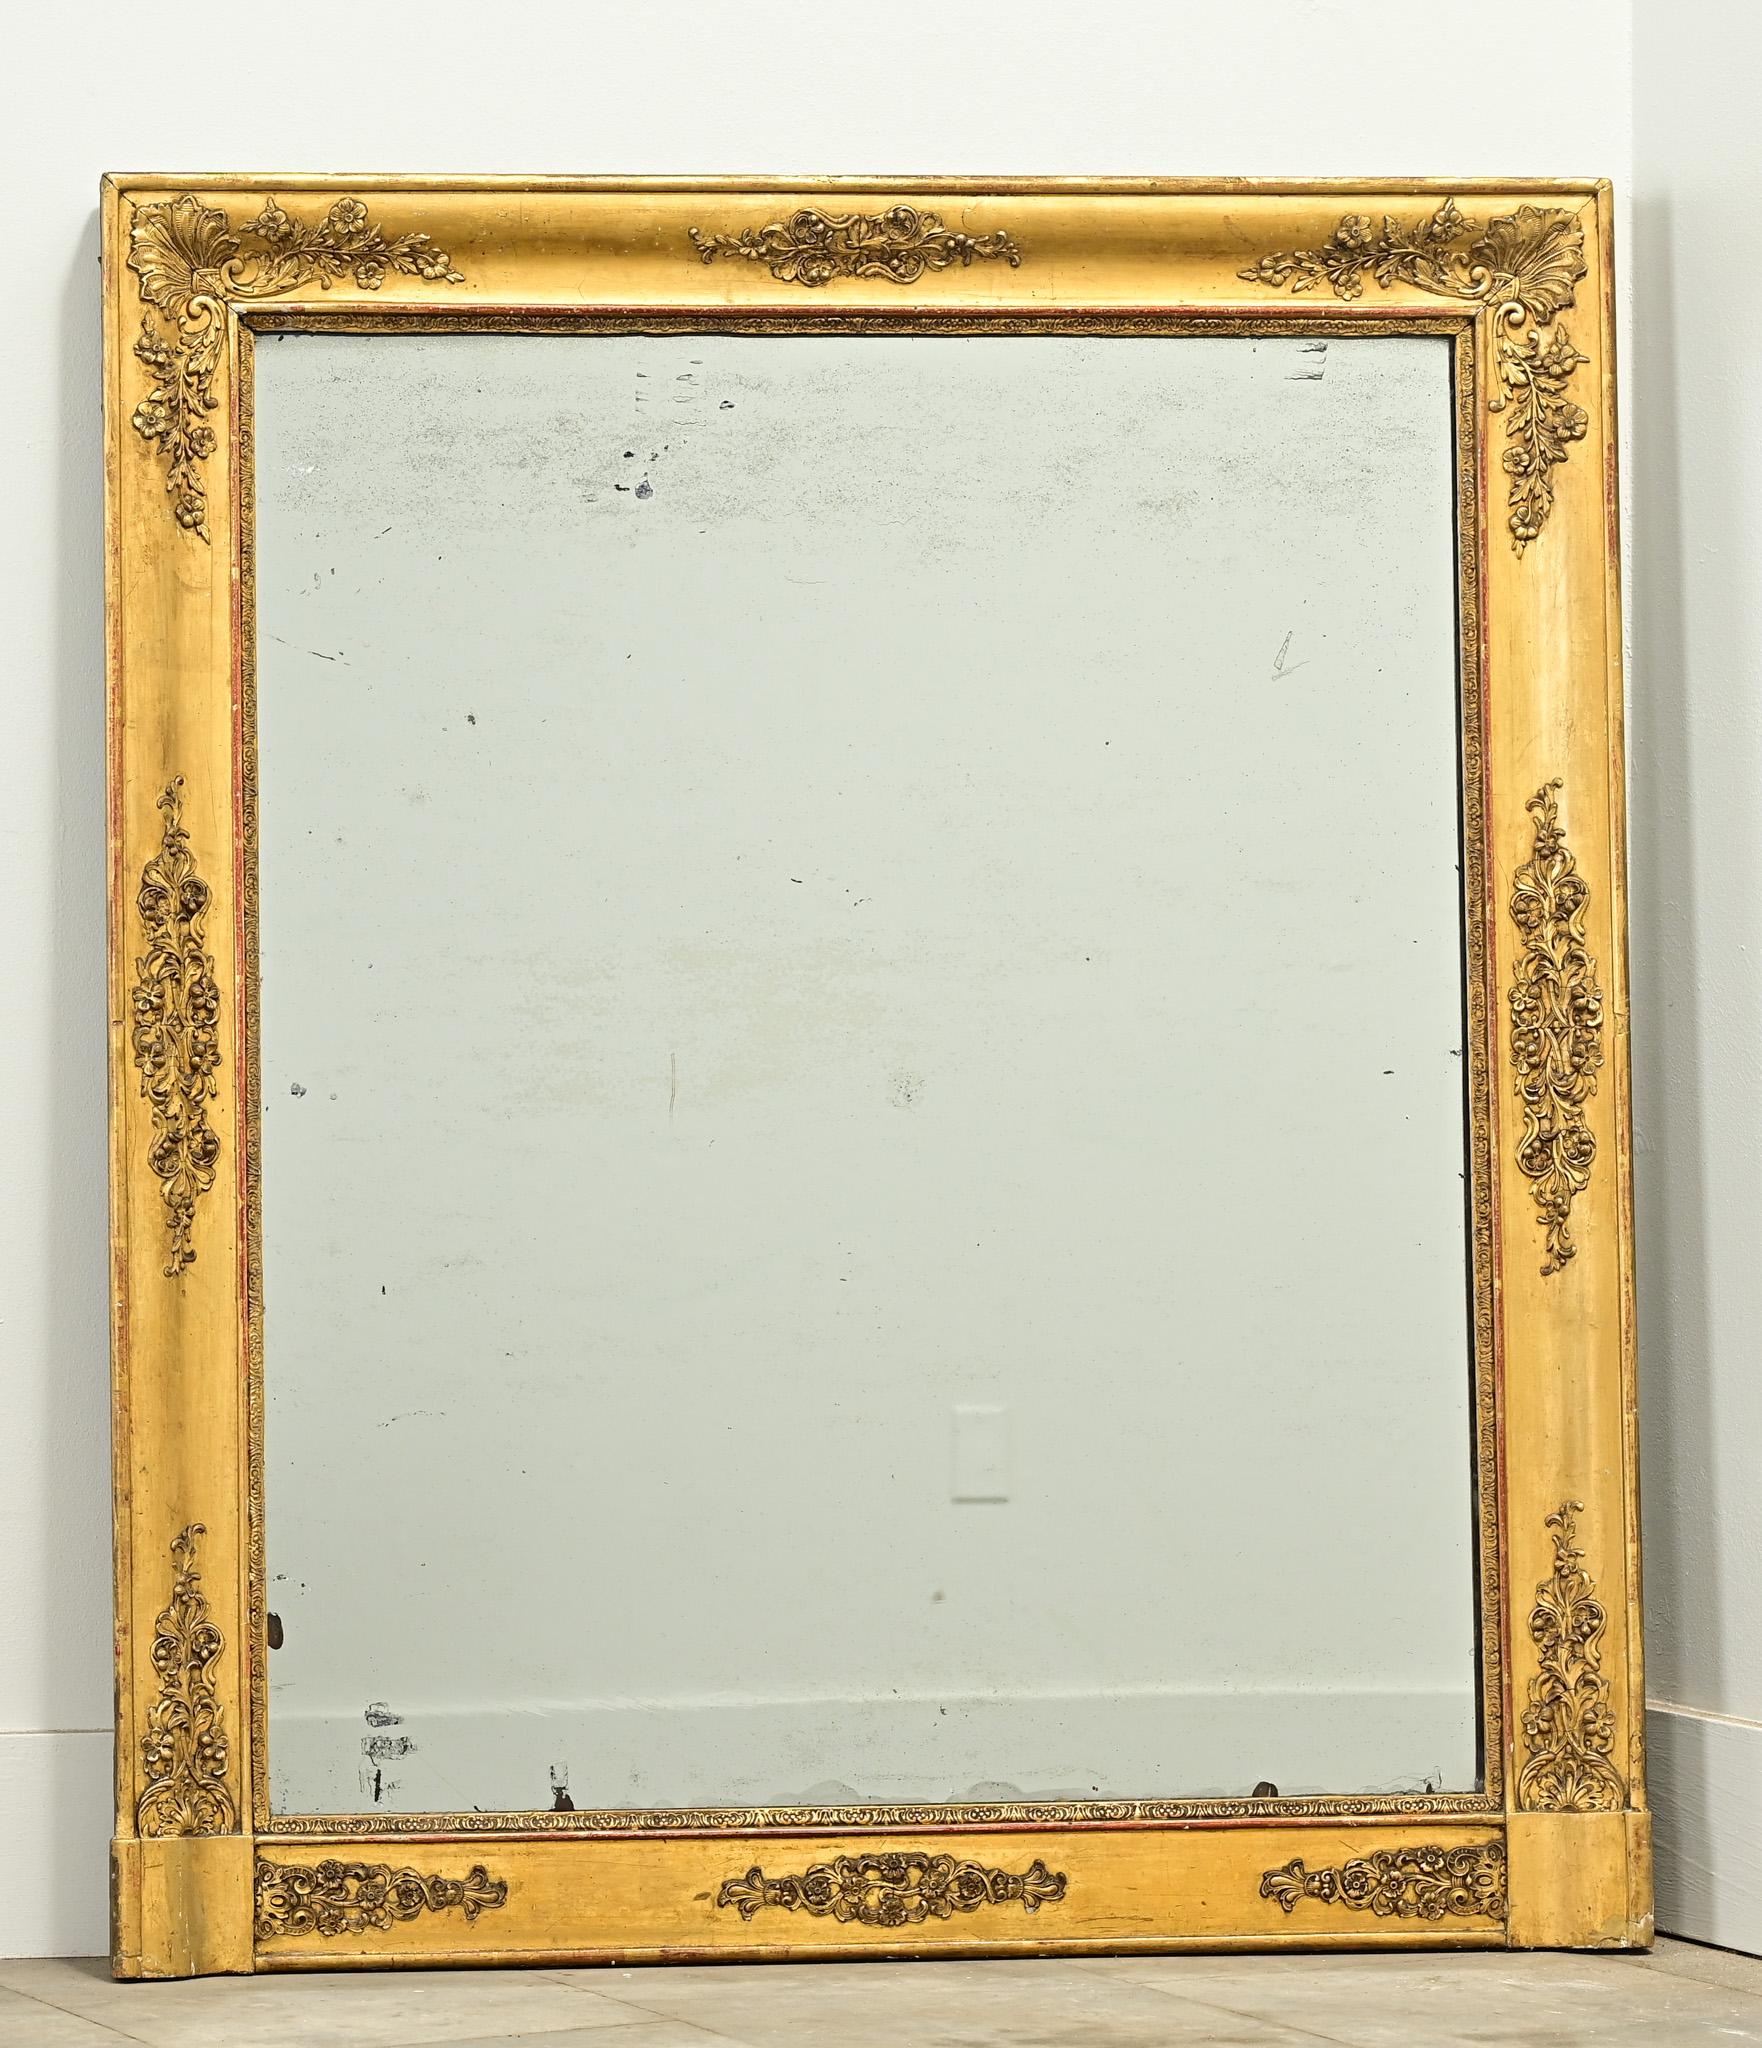 A French Empire gold gilt mantle mirror from the 1800’s. The carved frame has its original gold gilt finish revealing the reddish bole beneath with decorative floral applique details. The original mirror plate has foxing and light crystallization.